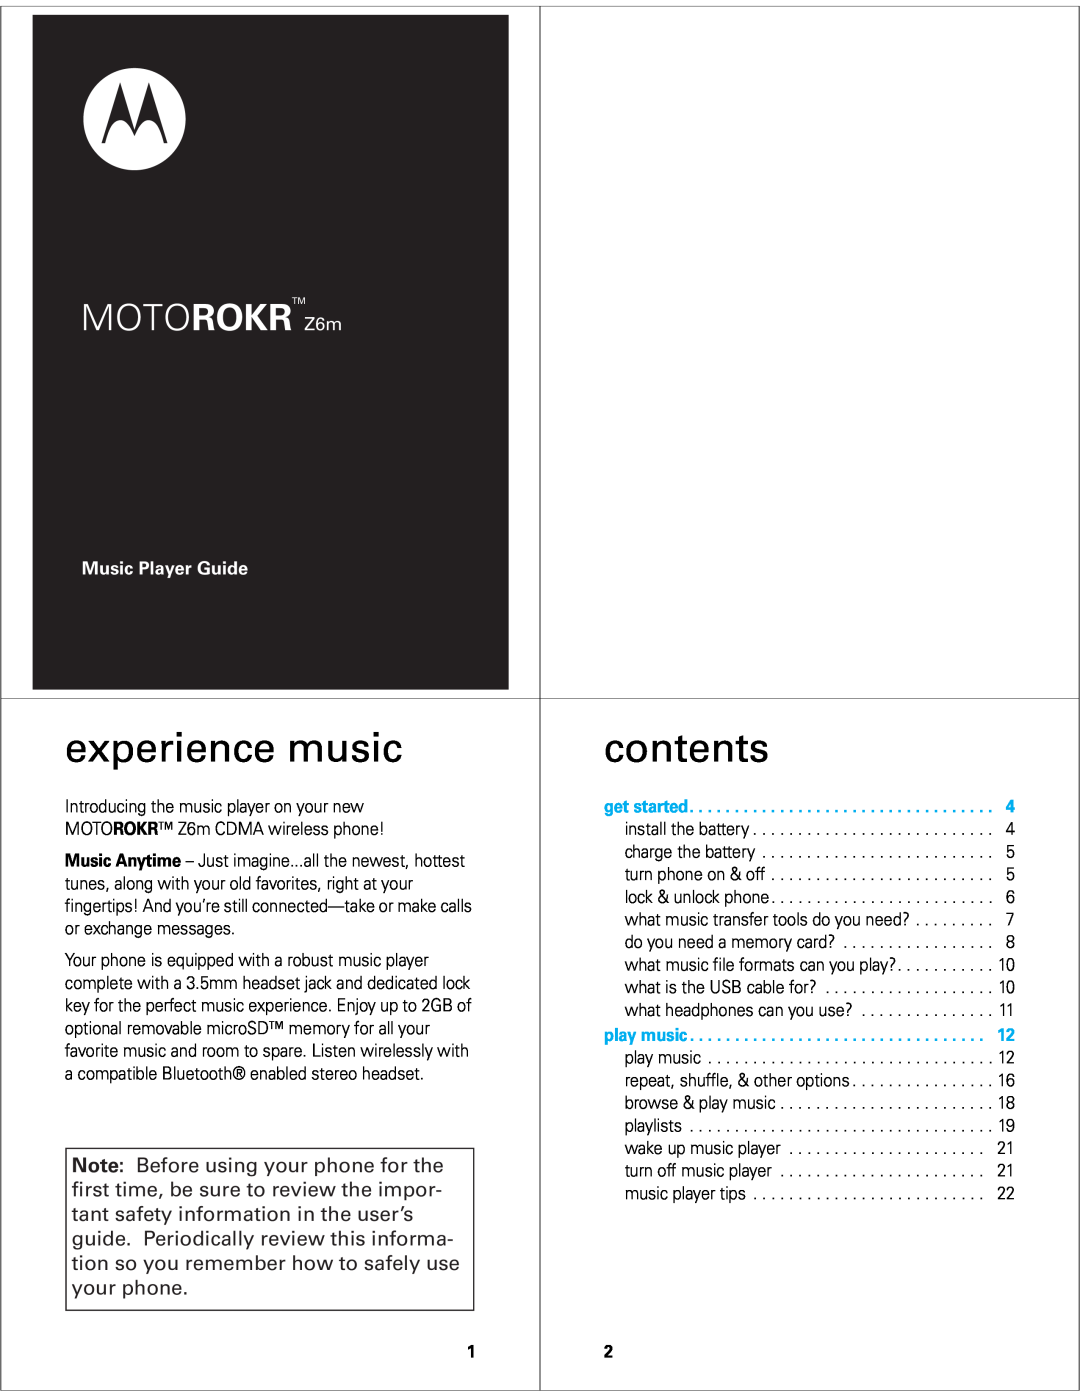 Motorola Z6M manual experience music, contents, MOTOROKR Z6m, Note Before using your phone for the, Music Player Guide 